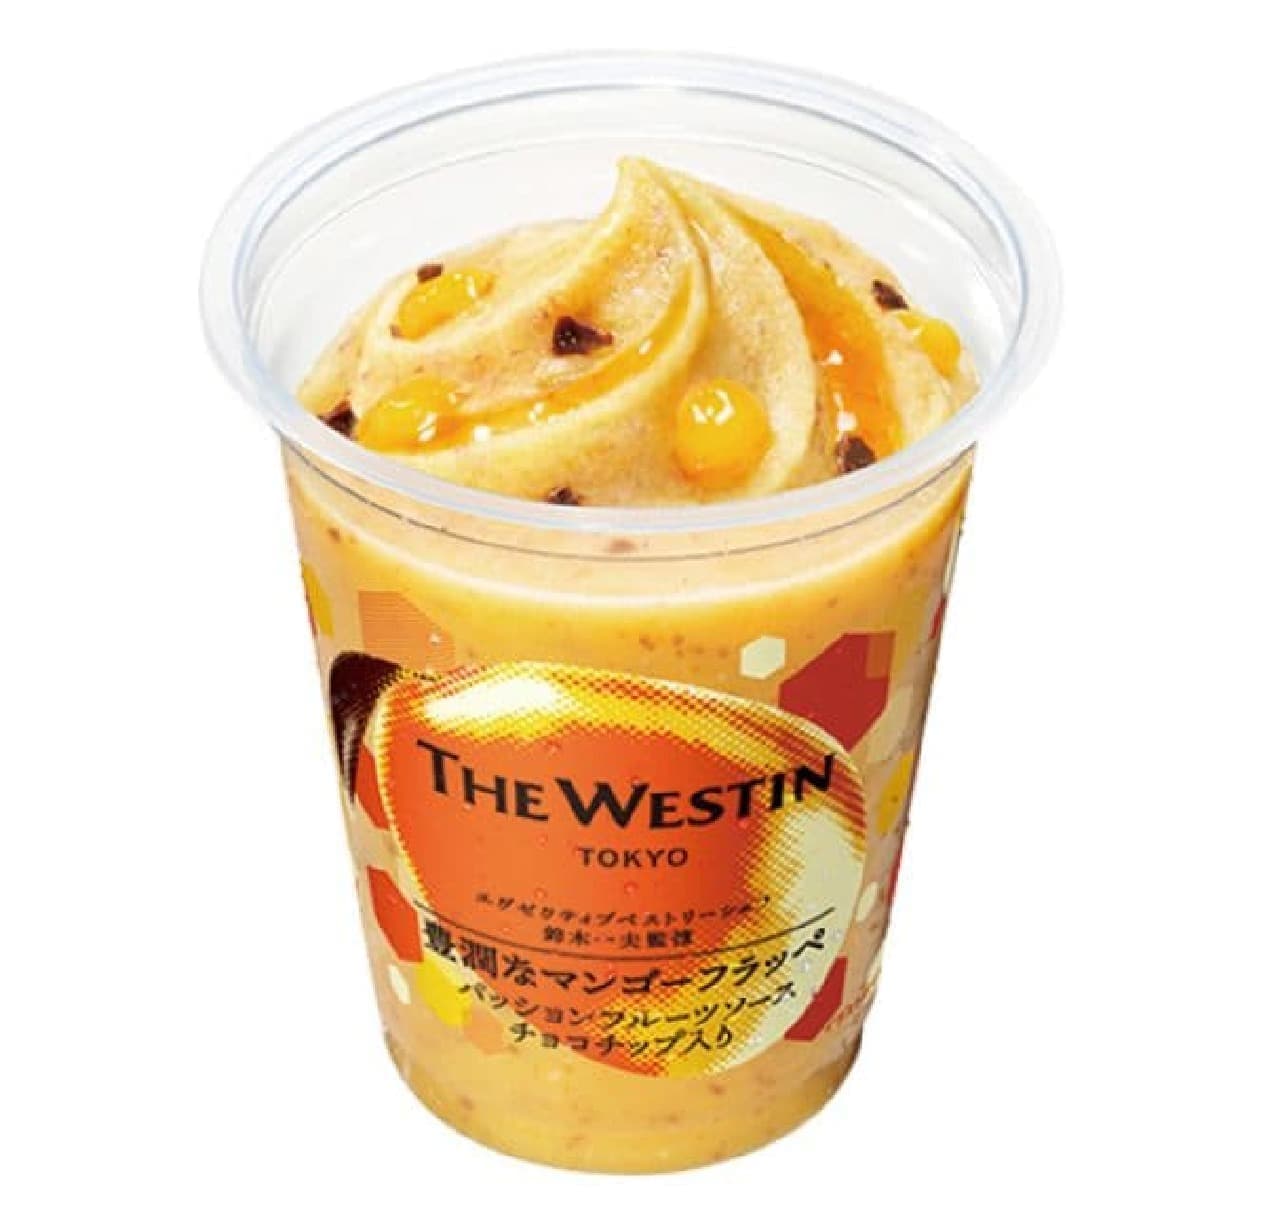 FamilyMart "Rich Mango Frappe supervised by The Westin Tokyo